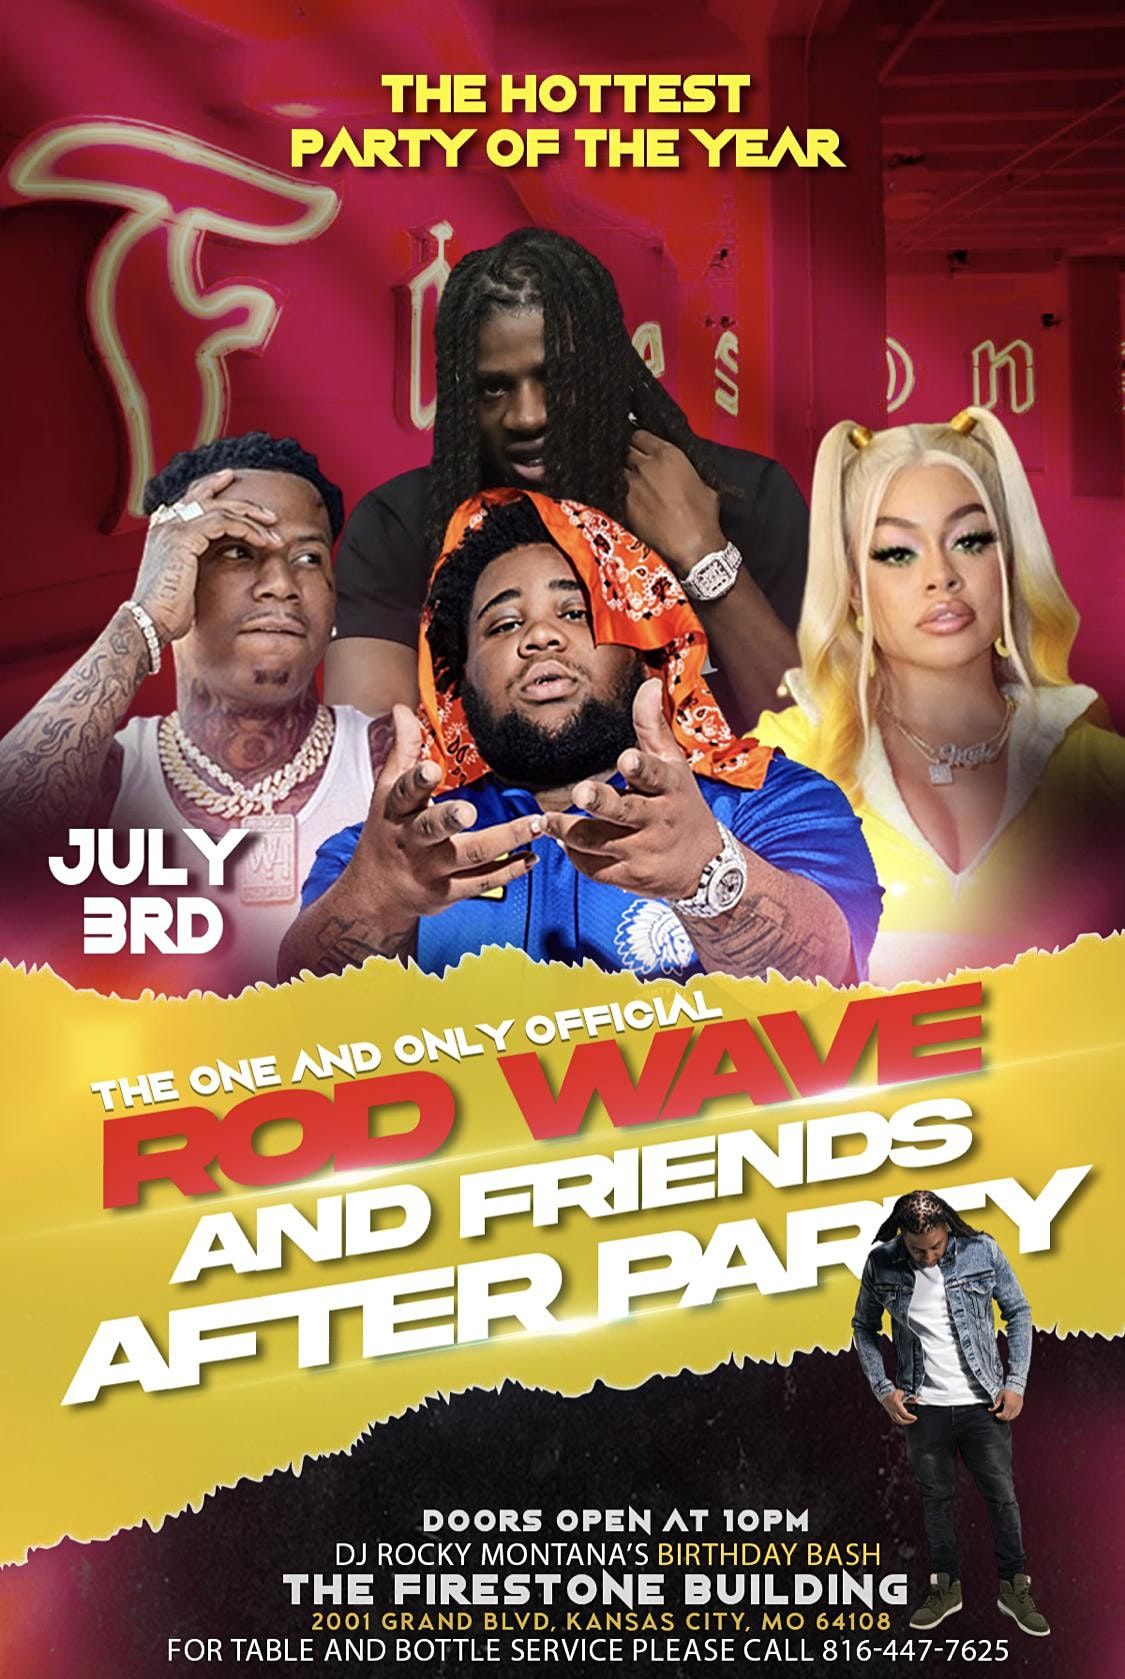 The One and only OFFICIAL ROD WAVE AND FRIENDS AFTER PARTY, The